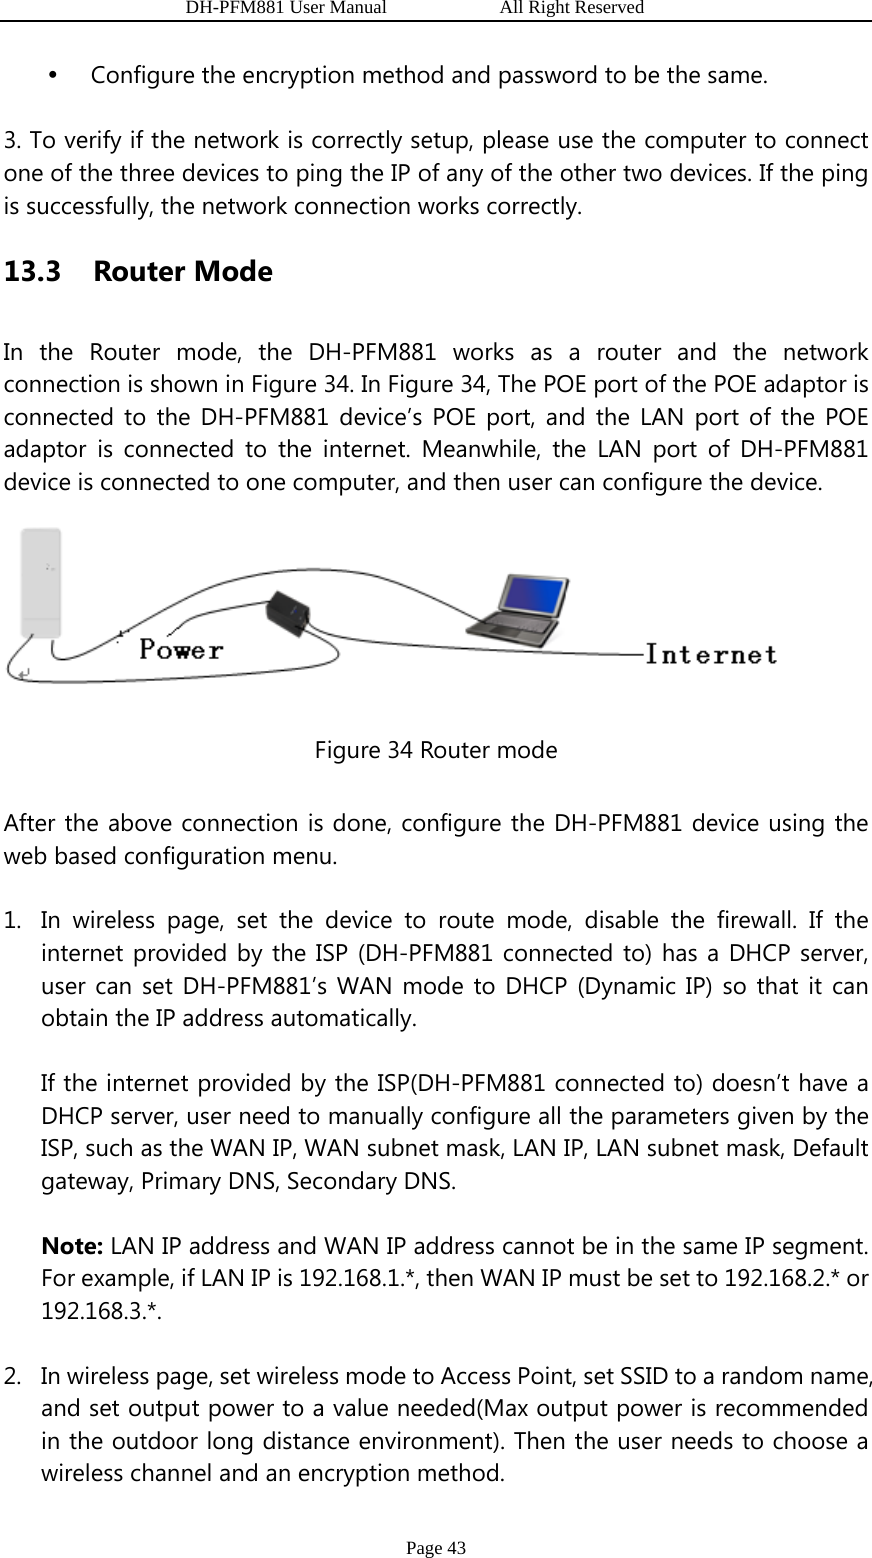                   DH-PFM881 User Manual            All Right Reserved Page 43 y Configure the encryption method and password to be the same. 3. To verify if the network is correctly setup, please use the computer to connect one of the three devices to ping the IP of any of the other two devices. If the ping is successfully, the network connection works correctly. 13.3  Router Mode In the Router mode, the DH-PFM881 works as a router and the network connection is shown in Figure 34. In Figure 34, The POE port of the POE adaptor is connected to the DH-PFM881 device’s POE port, and the LAN port of the POE adaptor is connected to the internet. Meanwhile, the LAN port of DH-PFM881 device is connected to one computer, and then user can configure the device.  Figure 34 Router mode After the above connection is done, configure the DH-PFM881 device using the web based configuration menu. 1. In wireless page, set the device to route mode, disable the firewall. If the internet provided by the ISP (DH-PFM881 connected to) has a DHCP server, user can set DH-PFM881’s WAN mode to DHCP (Dynamic IP) so that it can obtain the IP address automatically. If the internet provided by the ISP(DH-PFM881 connected to) doesn’t have a DHCP server, user need to manually configure all the parameters given by the ISP, such as the WAN IP, WAN subnet mask, LAN IP, LAN subnet mask, Default gateway, Primary DNS, Secondary DNS. Note: LAN IP address and WAN IP address cannot be in the same IP segment. For example, if LAN IP is 192.168.1.*, then WAN IP must be set to 192.168.2.* or 192.168.3.*. 2. In wireless page, set wireless mode to Access Point, set SSID to a random name, and set output power to a value needed(Max output power is recommended in the outdoor long distance environment). Then the user needs to choose a wireless channel and an encryption method. 